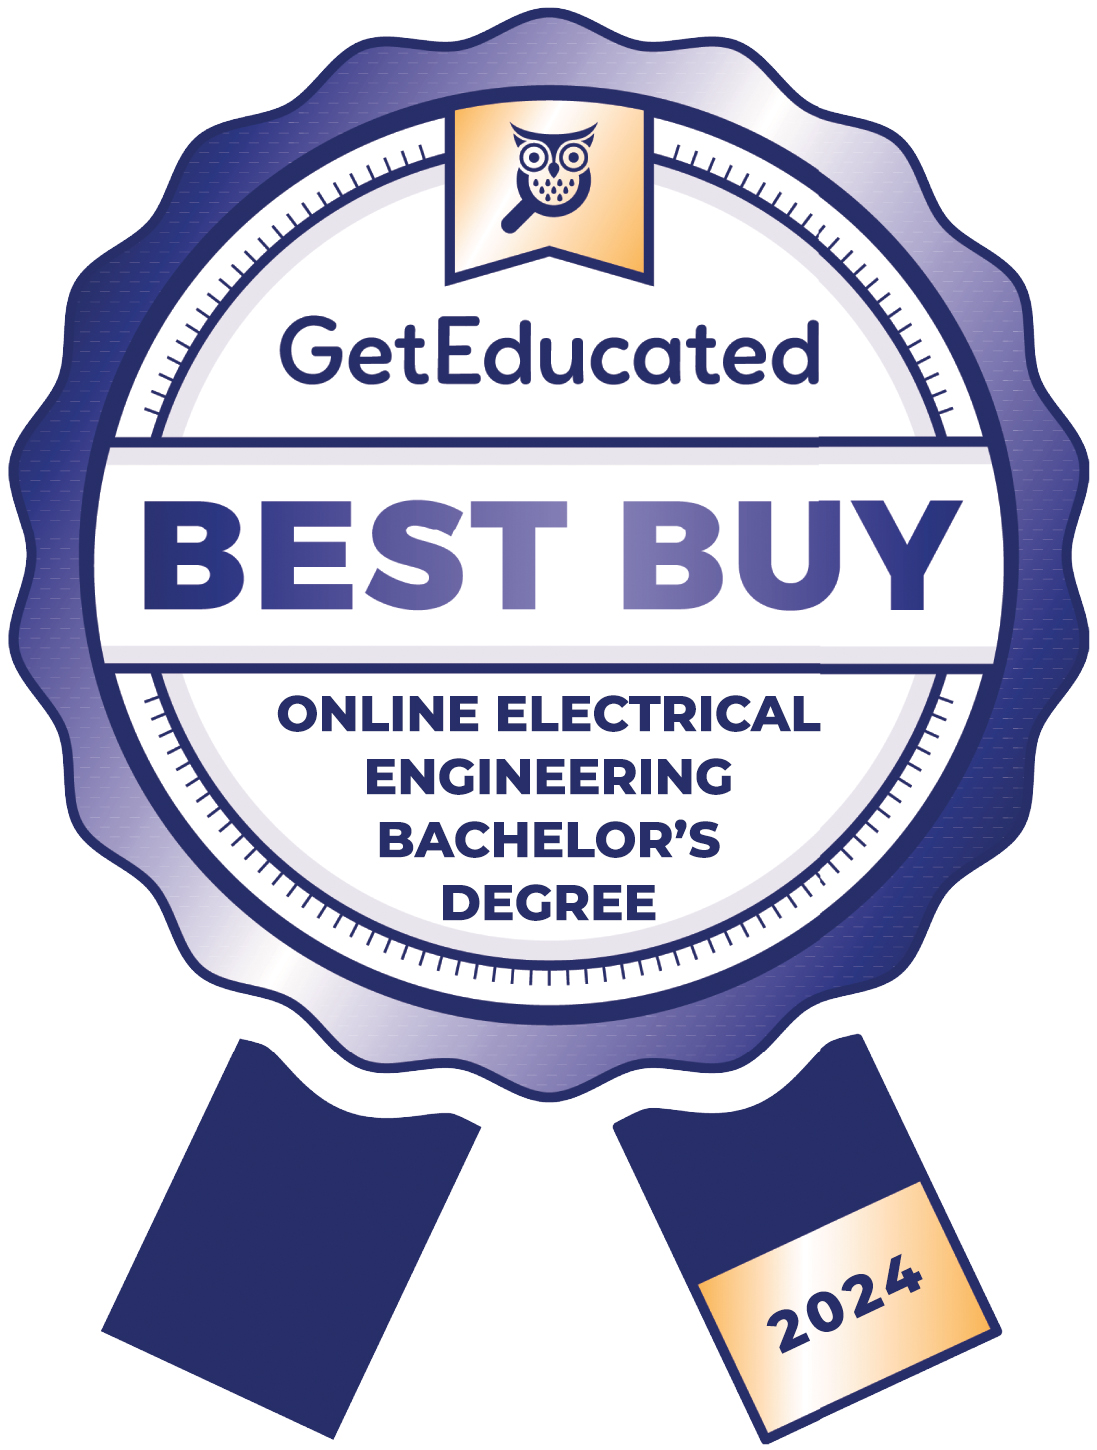 Rankings of the cheapest online electrical engineering bachelor's degree programs